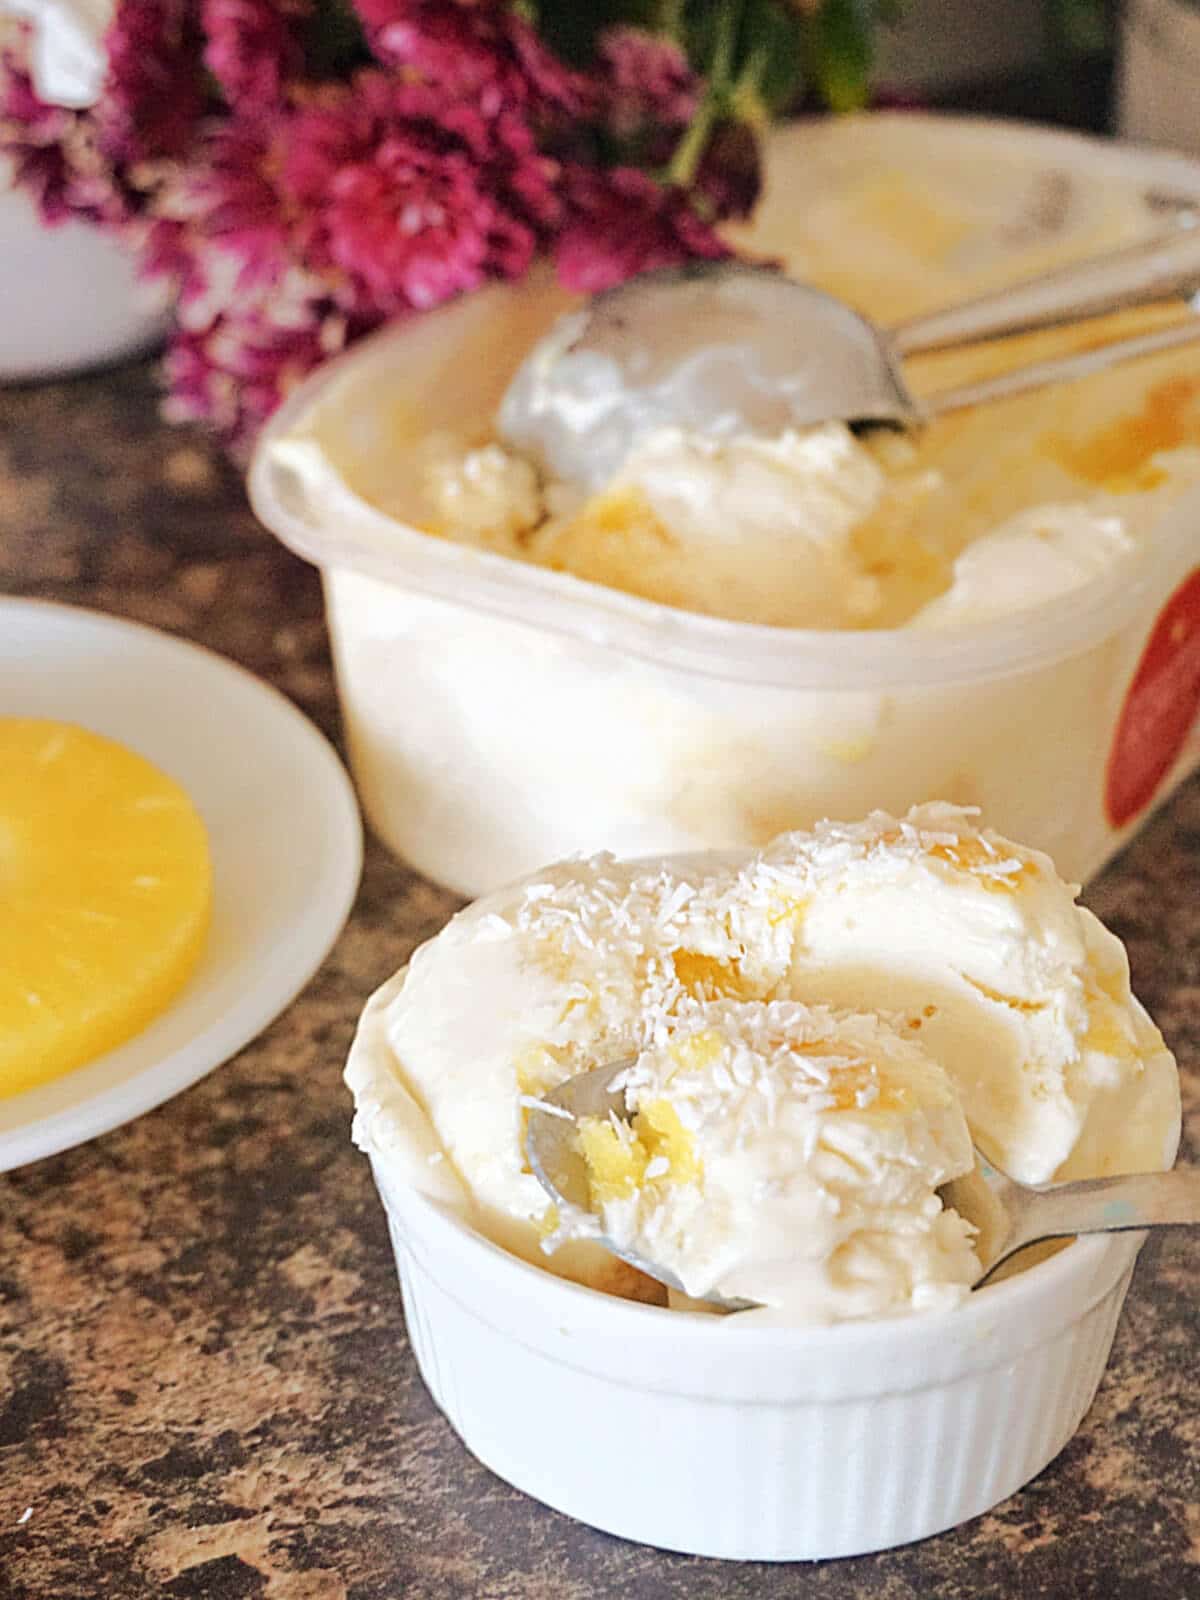 A white ramekin with 3 scoops of ice cream, a plate with a pineapple ring and a tub of more ice cream.